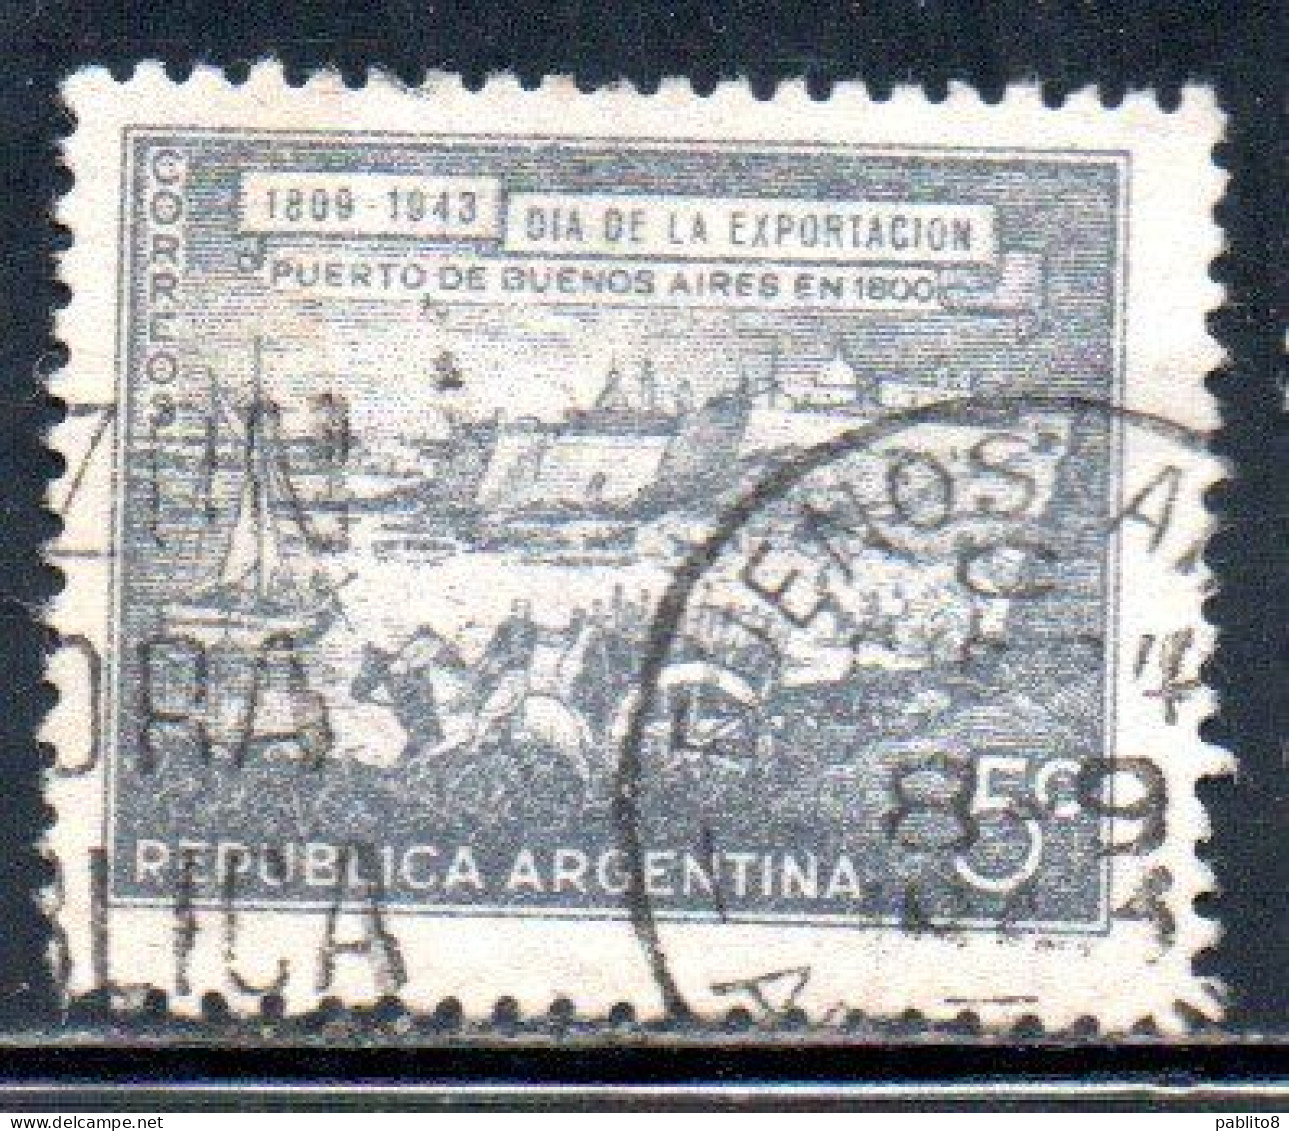 ARGENTINA 1943 DAY OF EXPORTS PORT OF BUENOS AIRES IN 1800  5c USED USADO OBLITERE' - Oblitérés